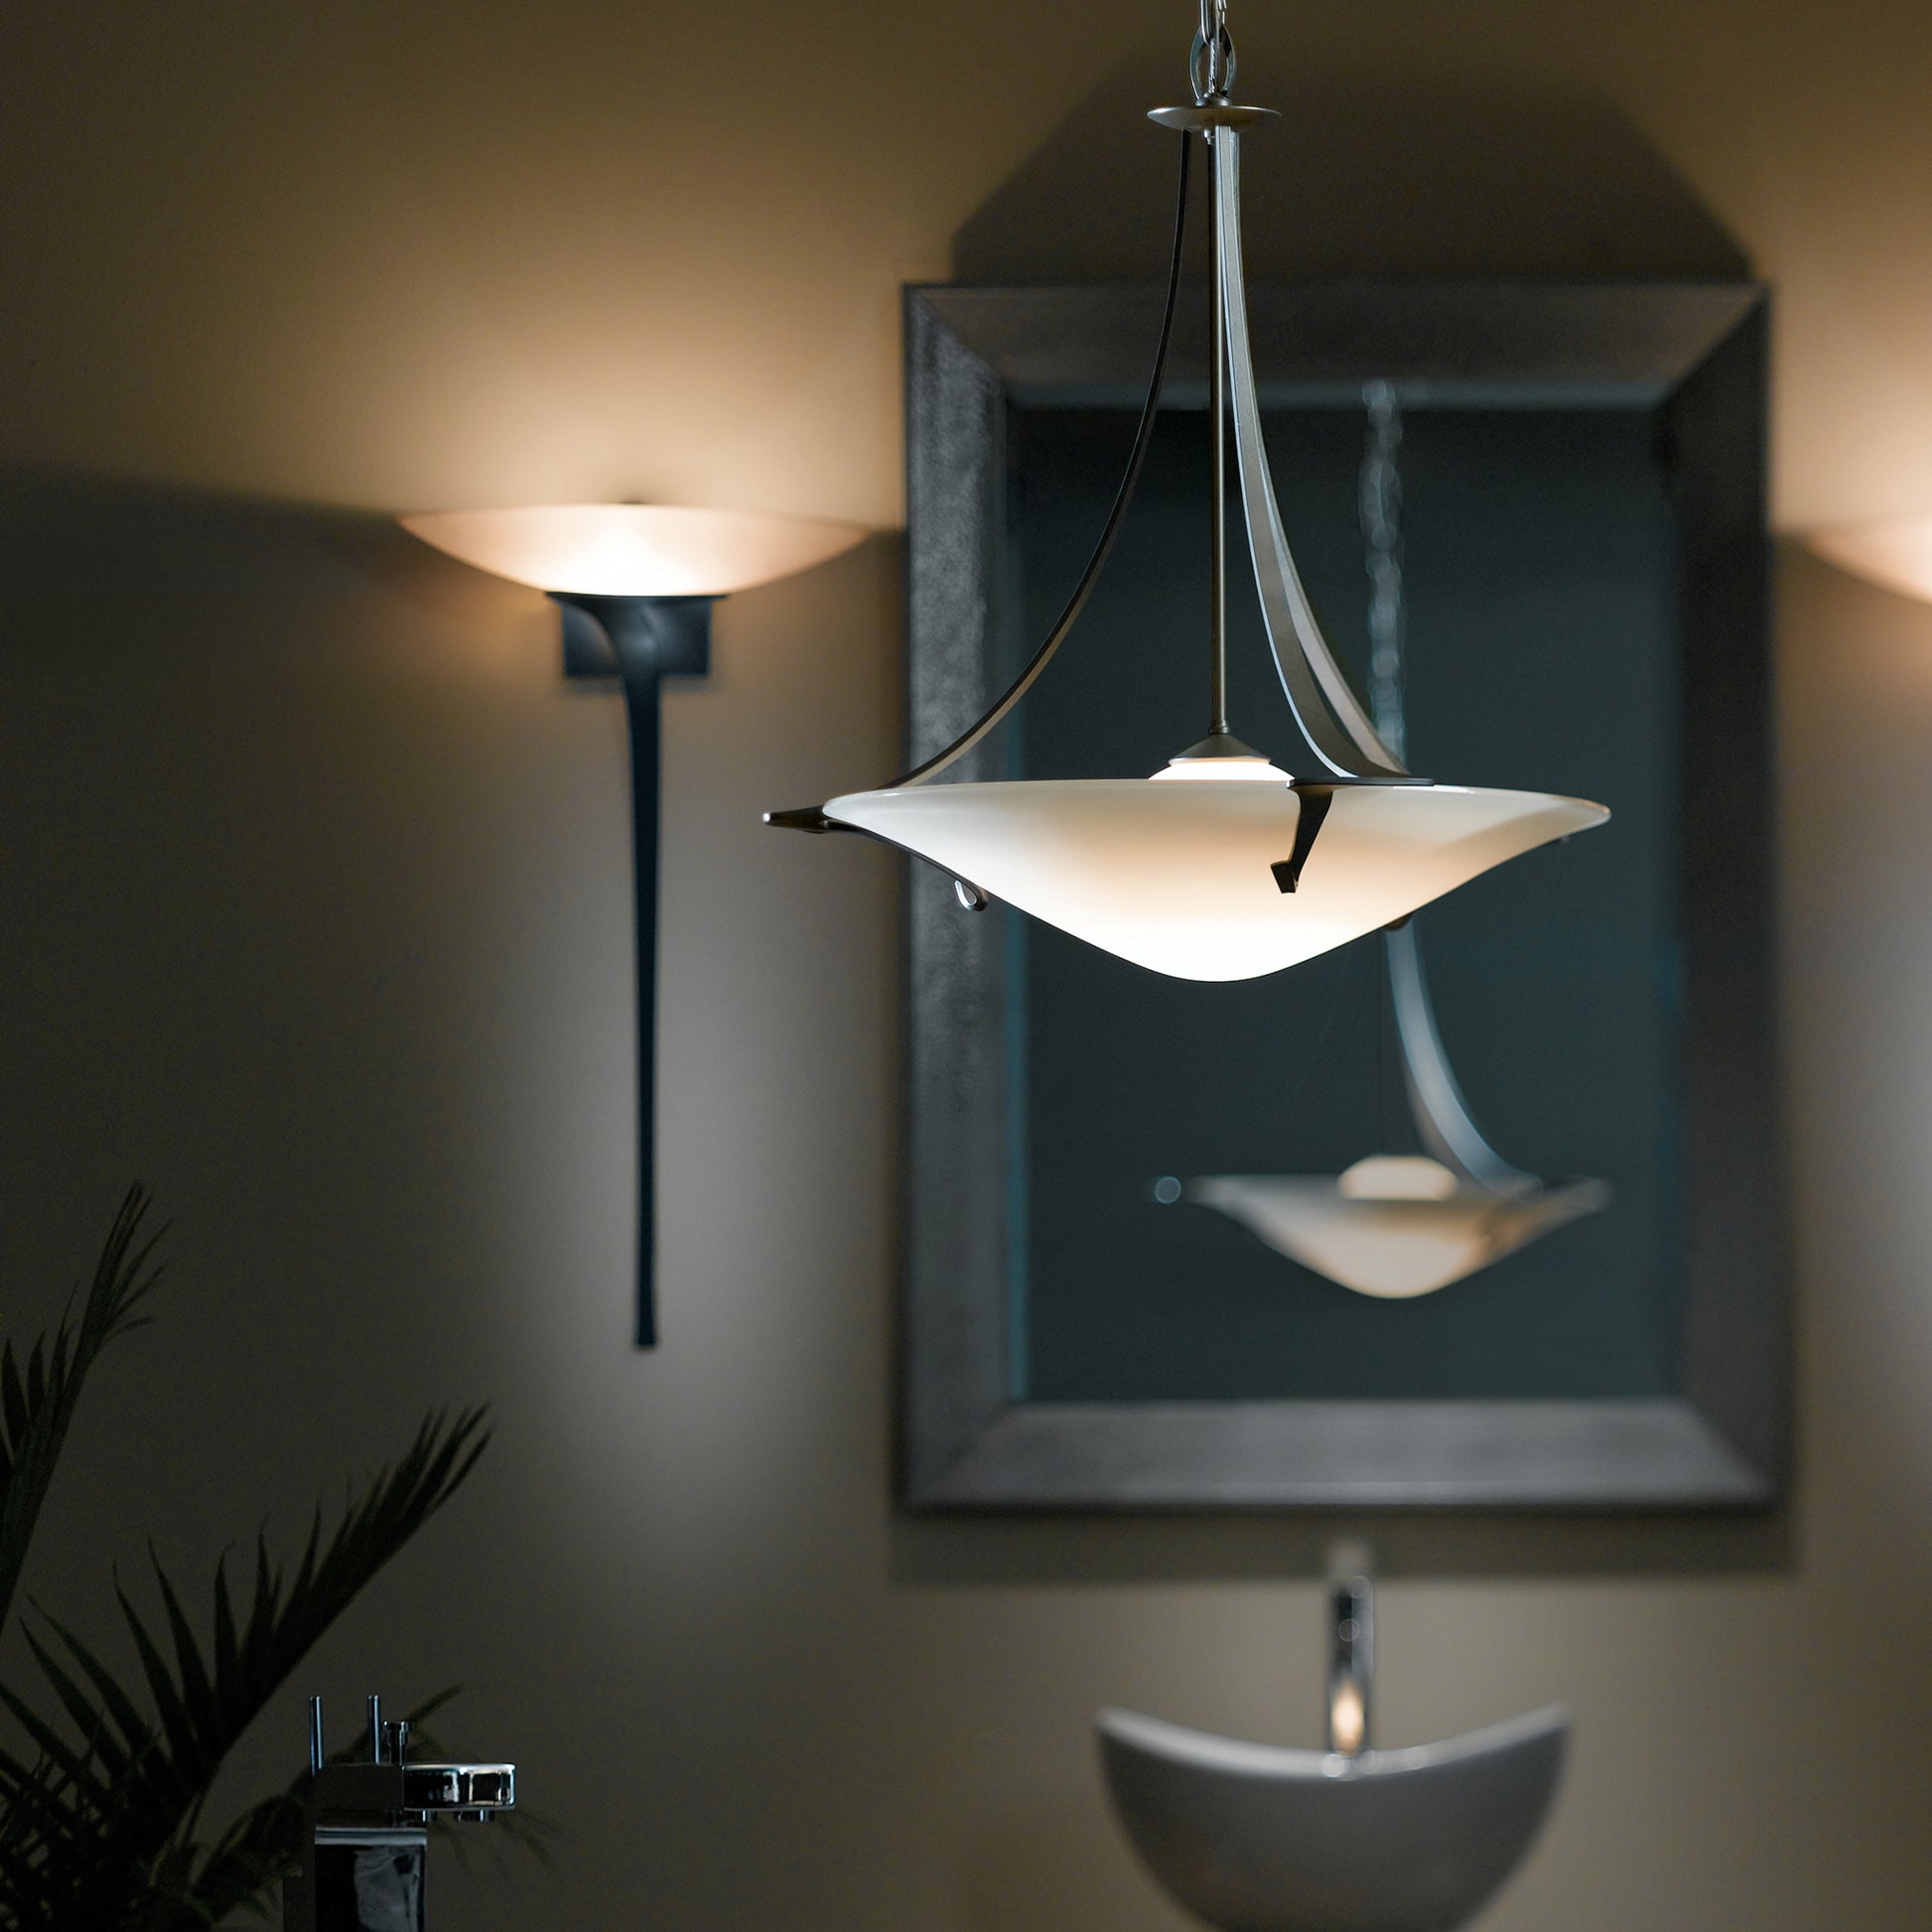 An elegant bathroom with a sink, mirror, and the Hubbardton Forge Antasia Pendant showcasing exquisite craftsmanship.